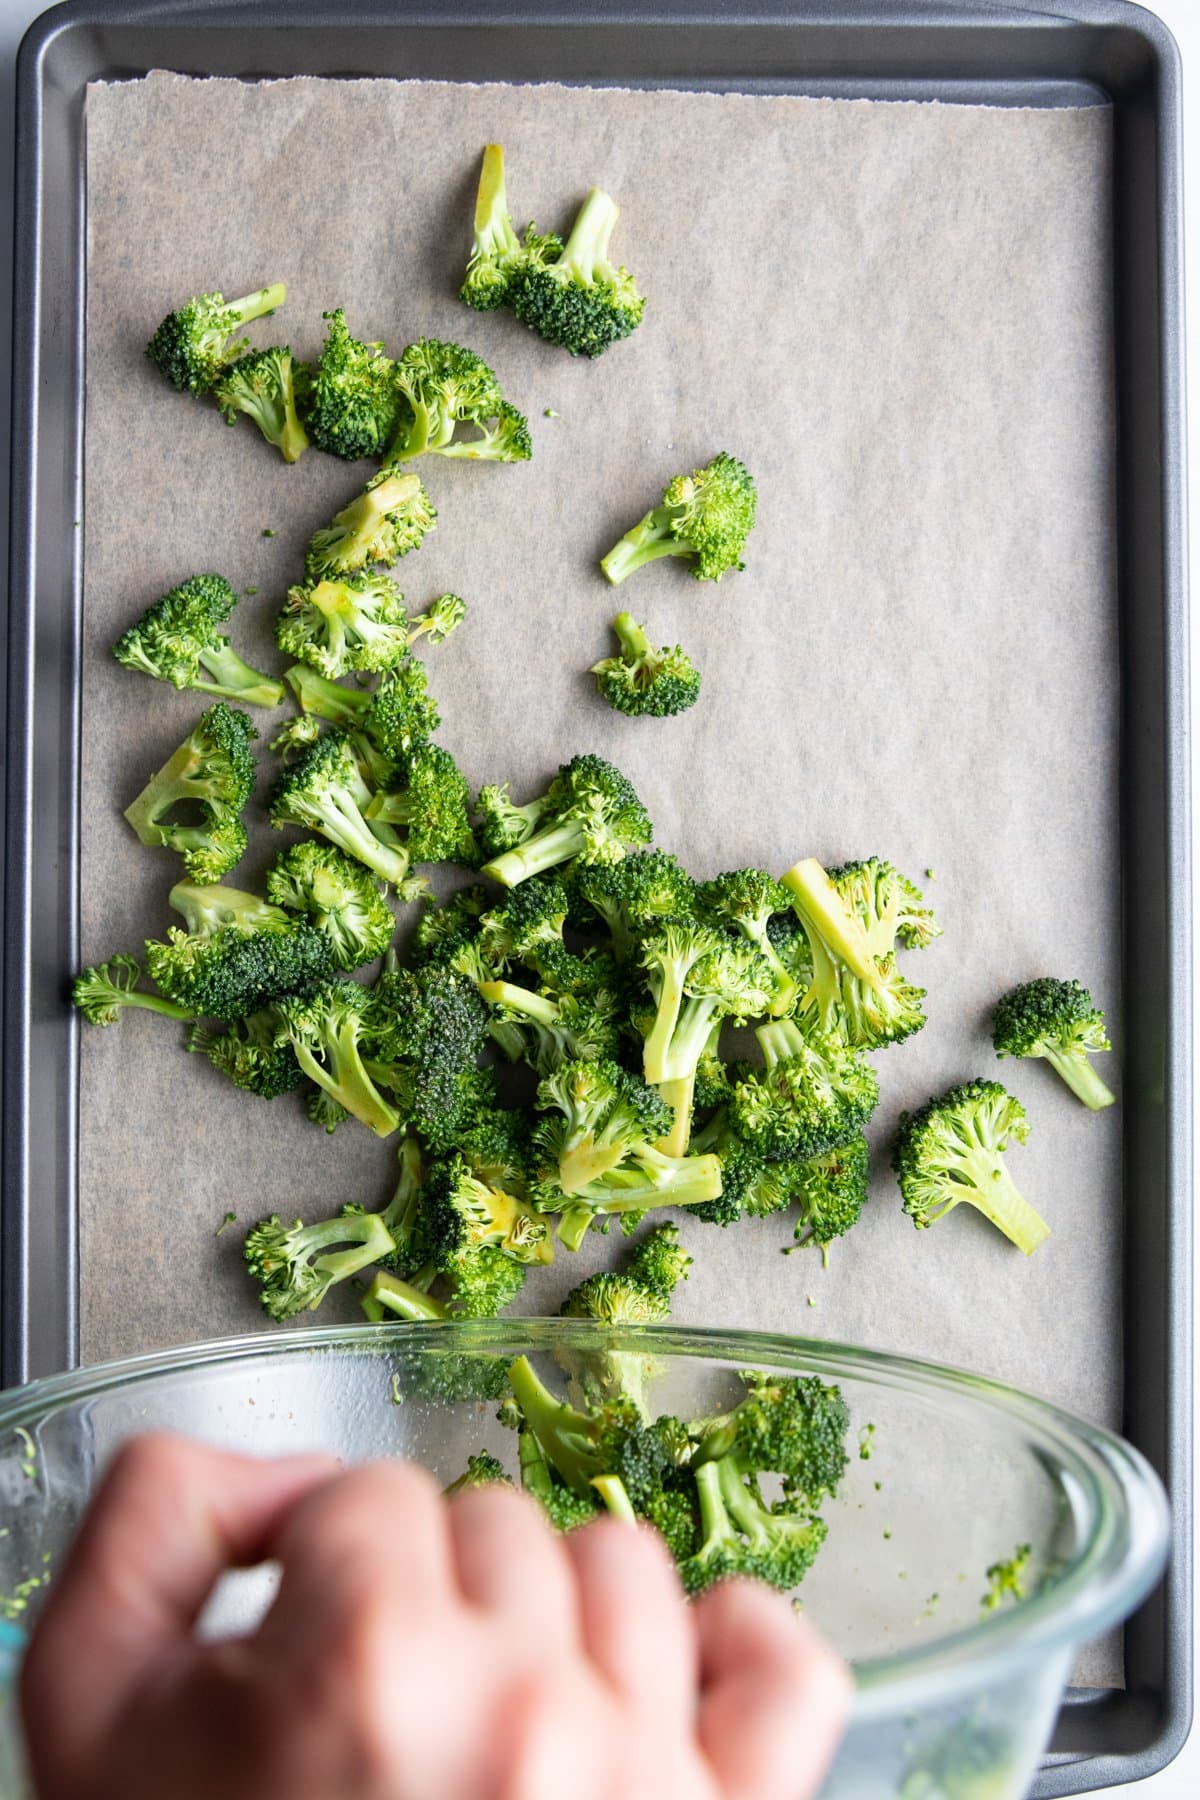 Dumping coated broccoli florets onto a baking sheet lined with parchment paper.